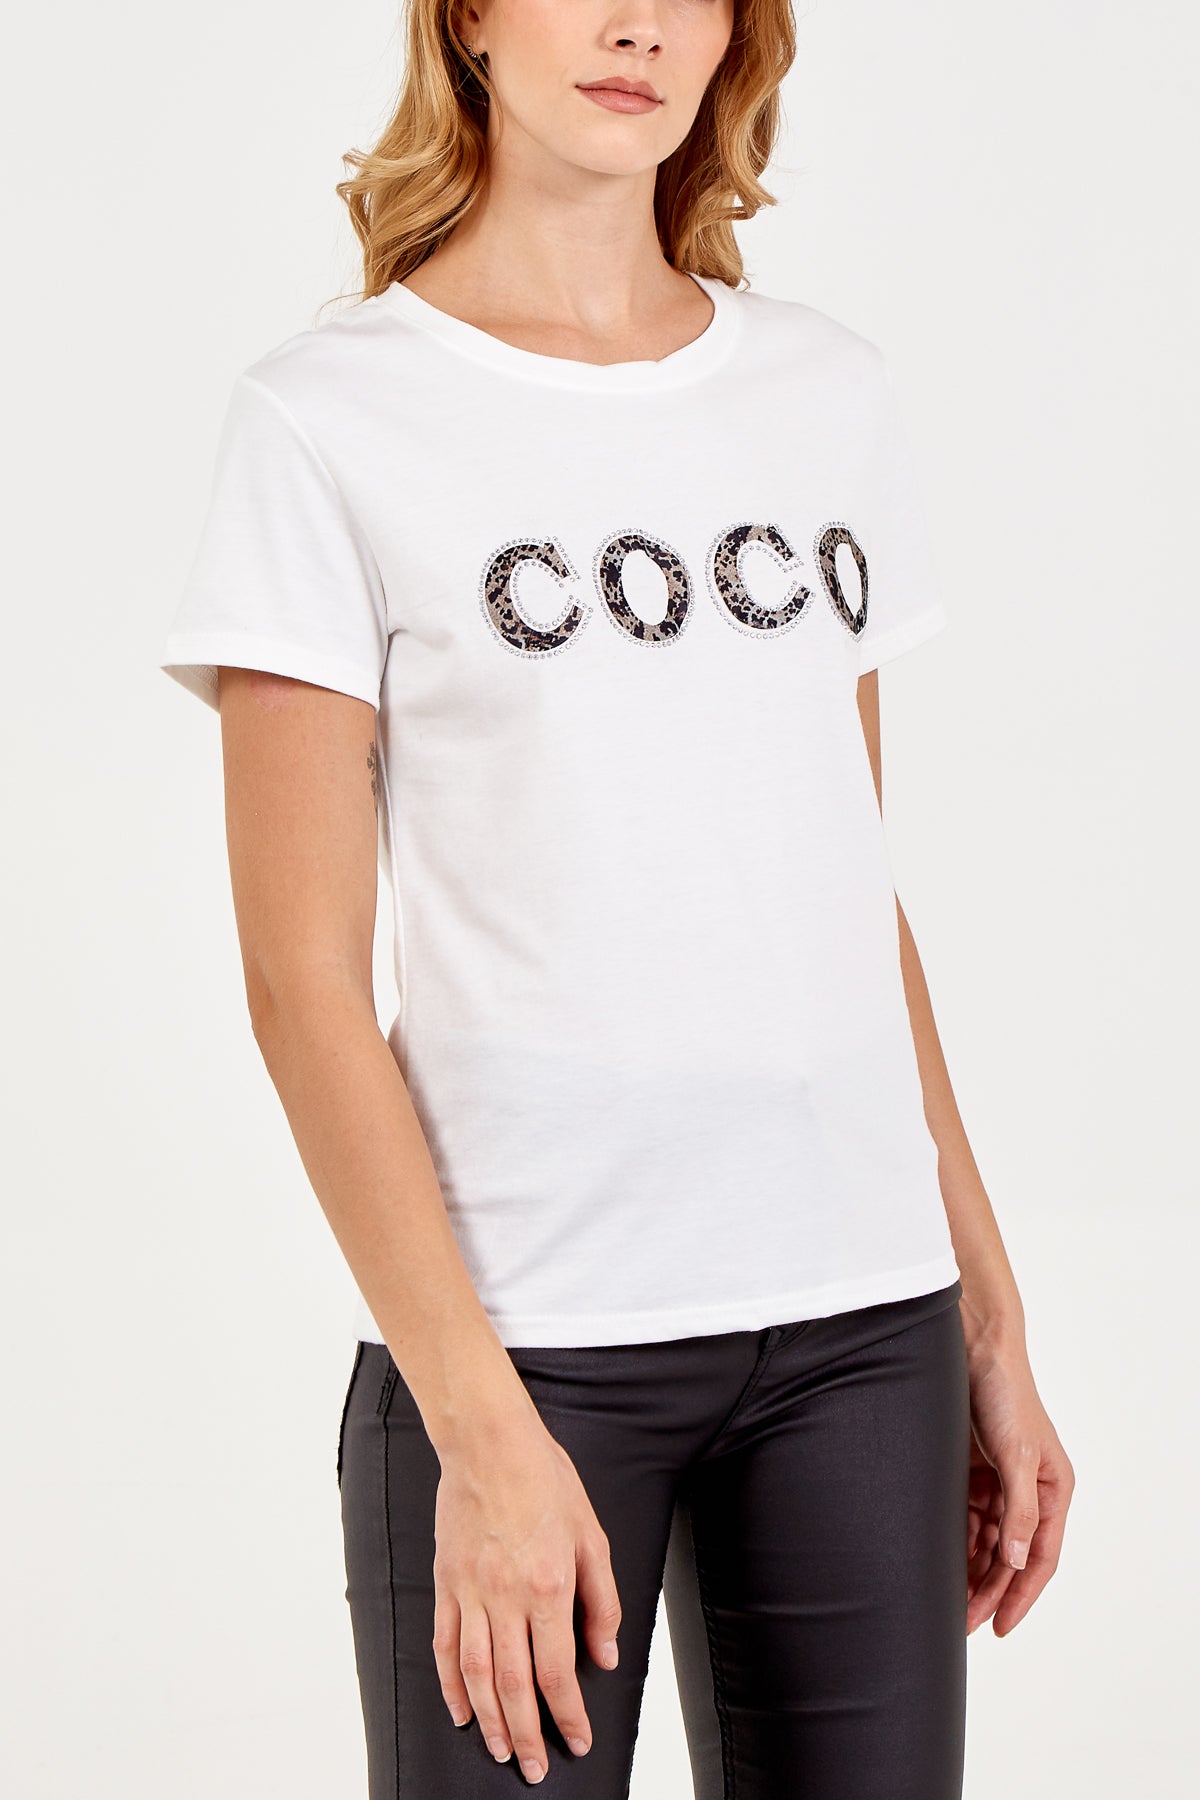 Coco Embellished T-Shirt